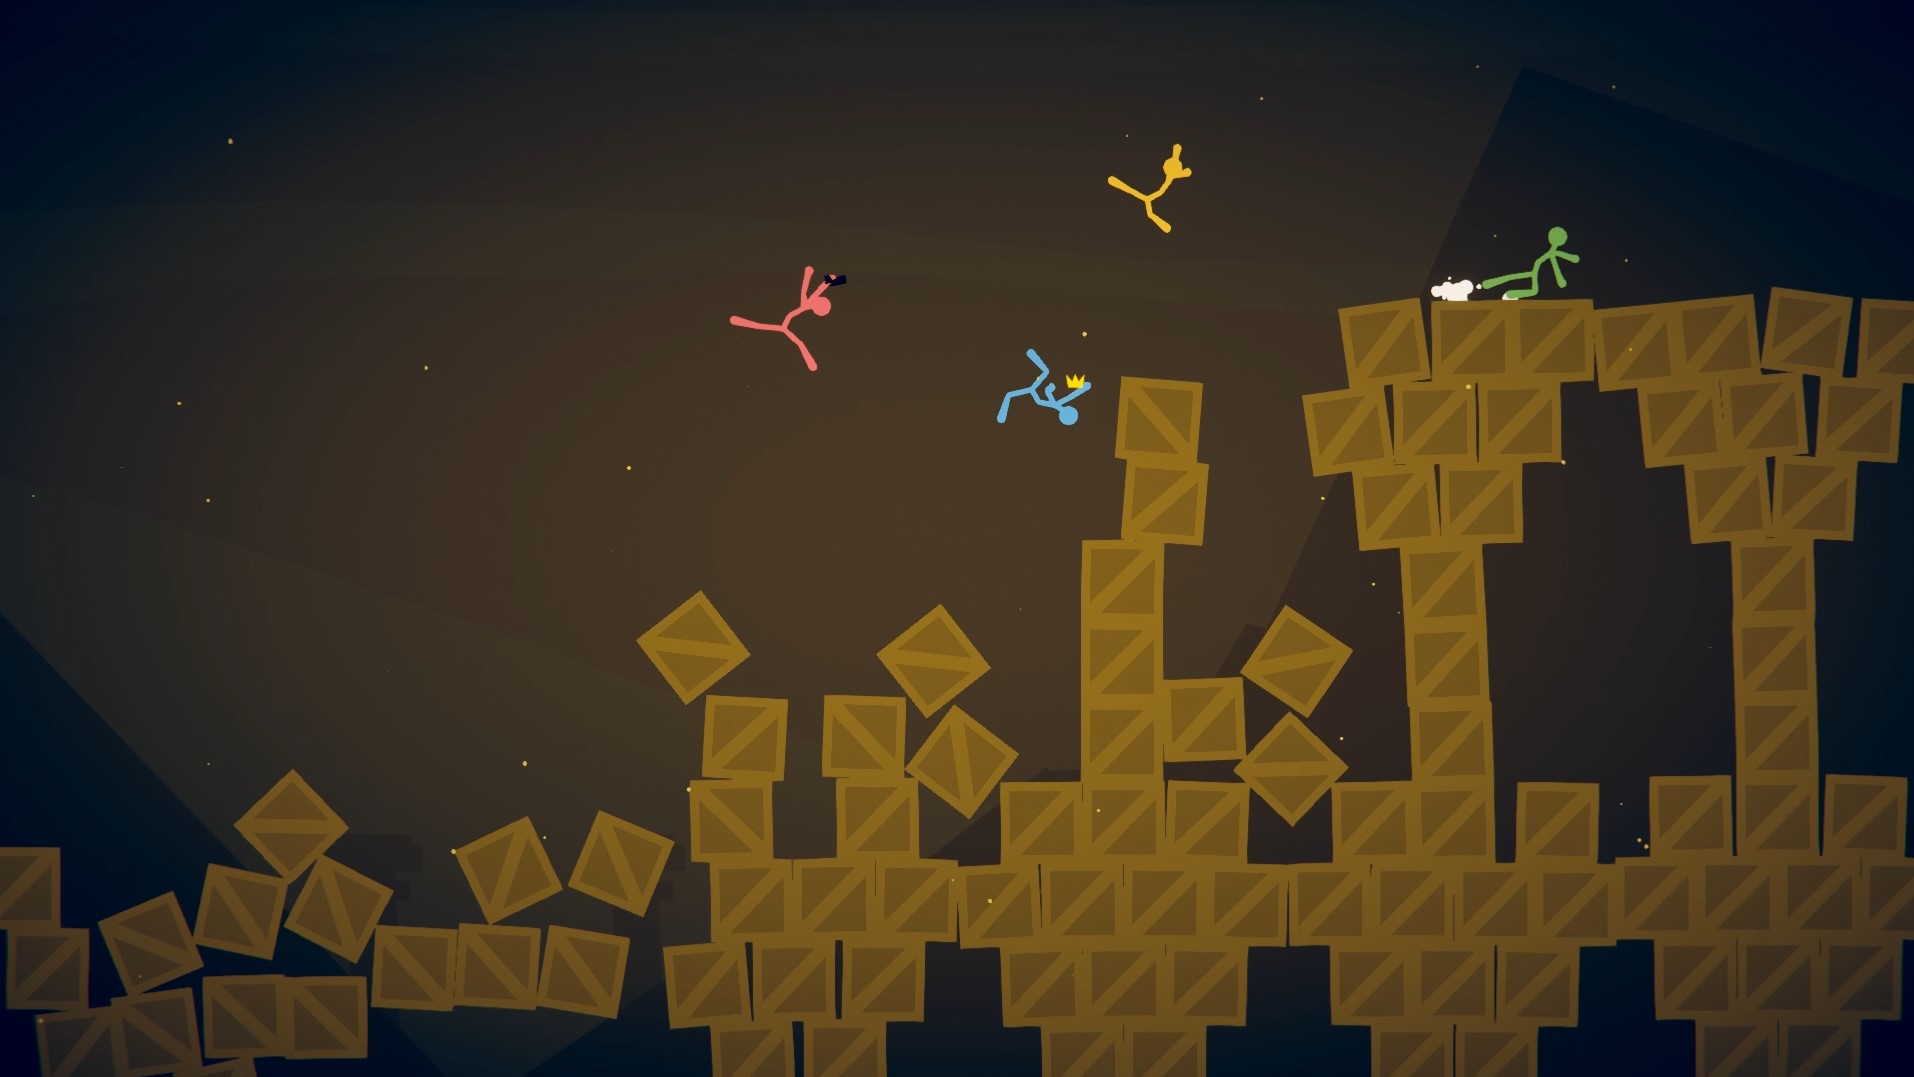 Stick fight: Stickman Games on the App Store